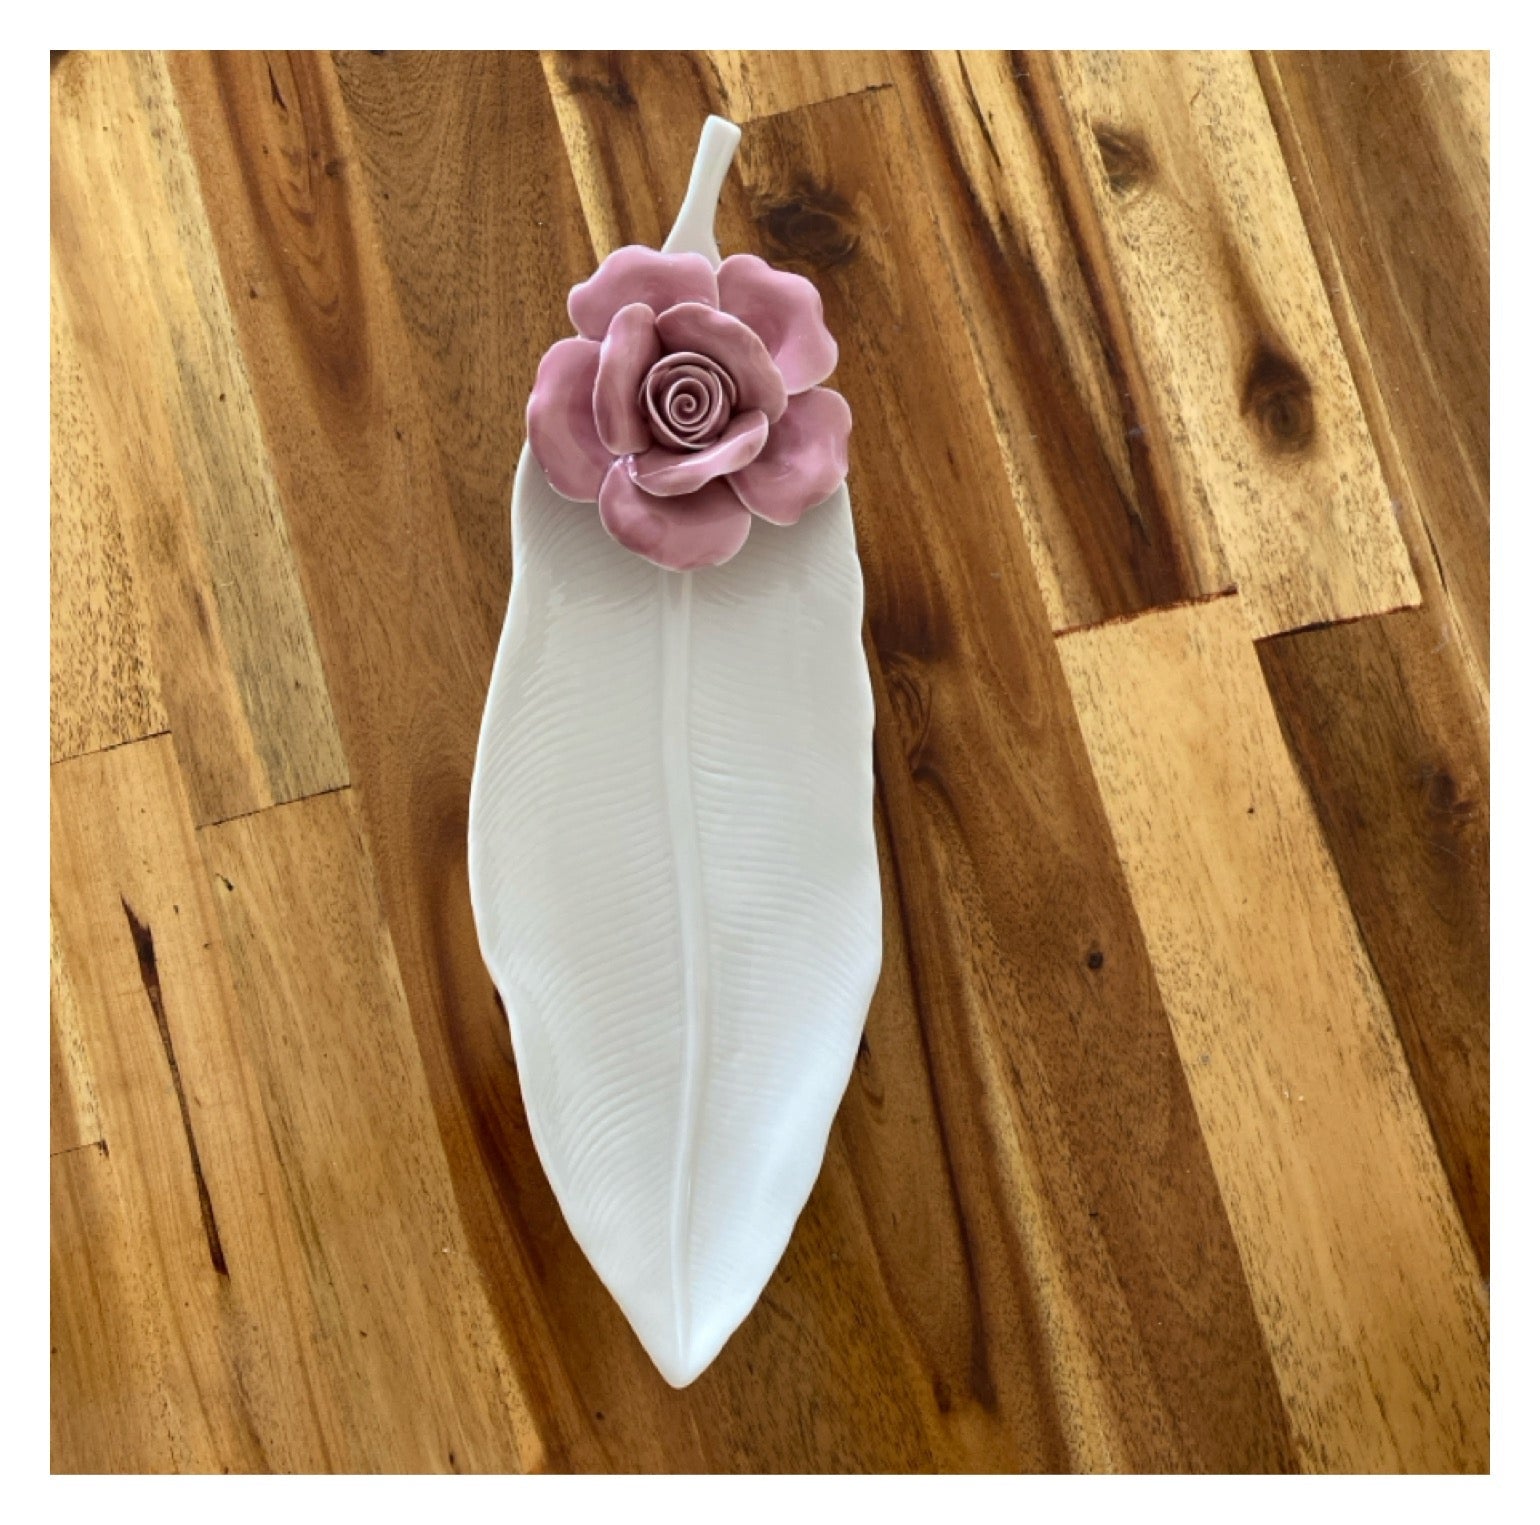 Plate Tray White Leaf Flower - The Renmy Store Homewares & Gifts 